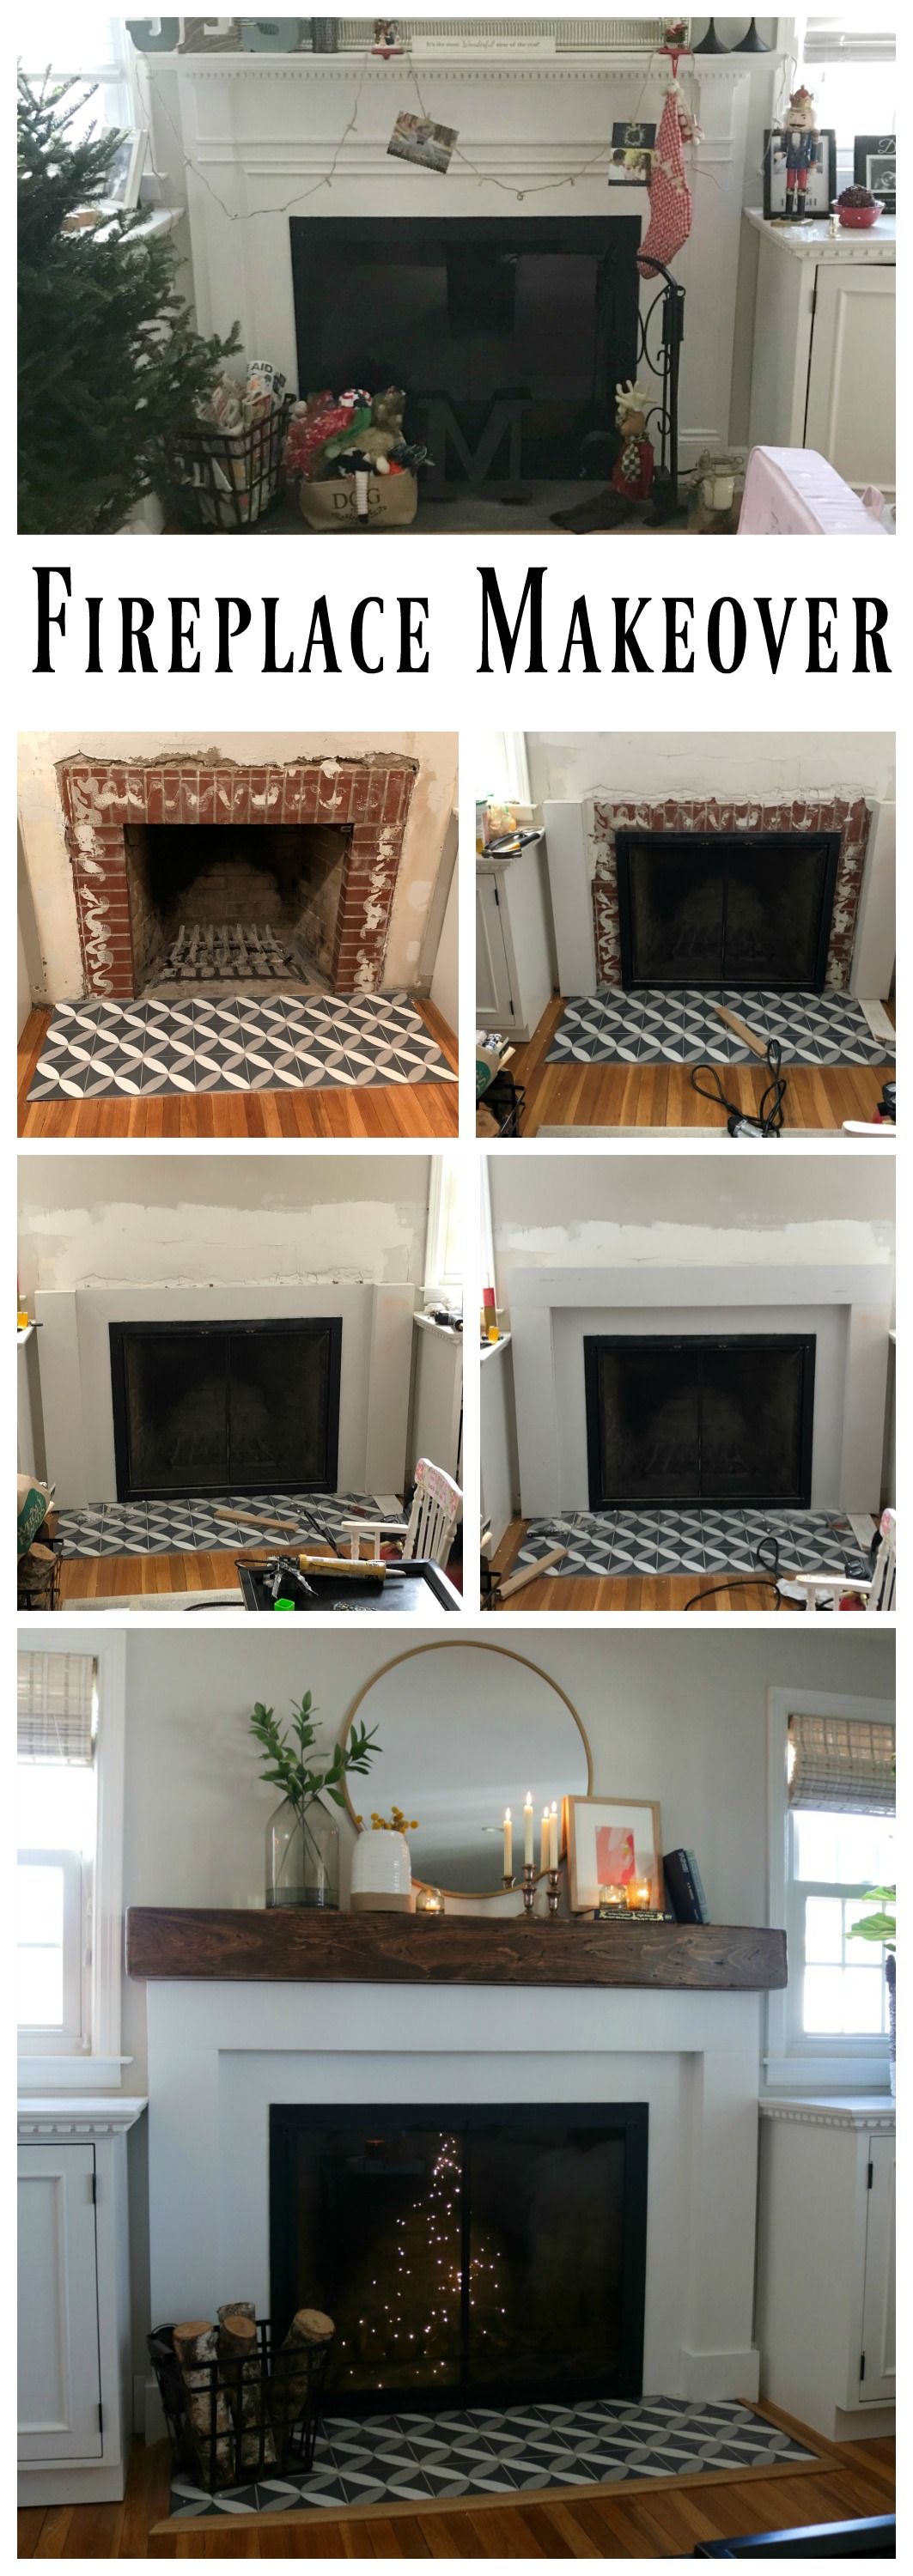 Target Electric Fireplace Best Of Fireplace Makeover and Styled with Decor From Tar